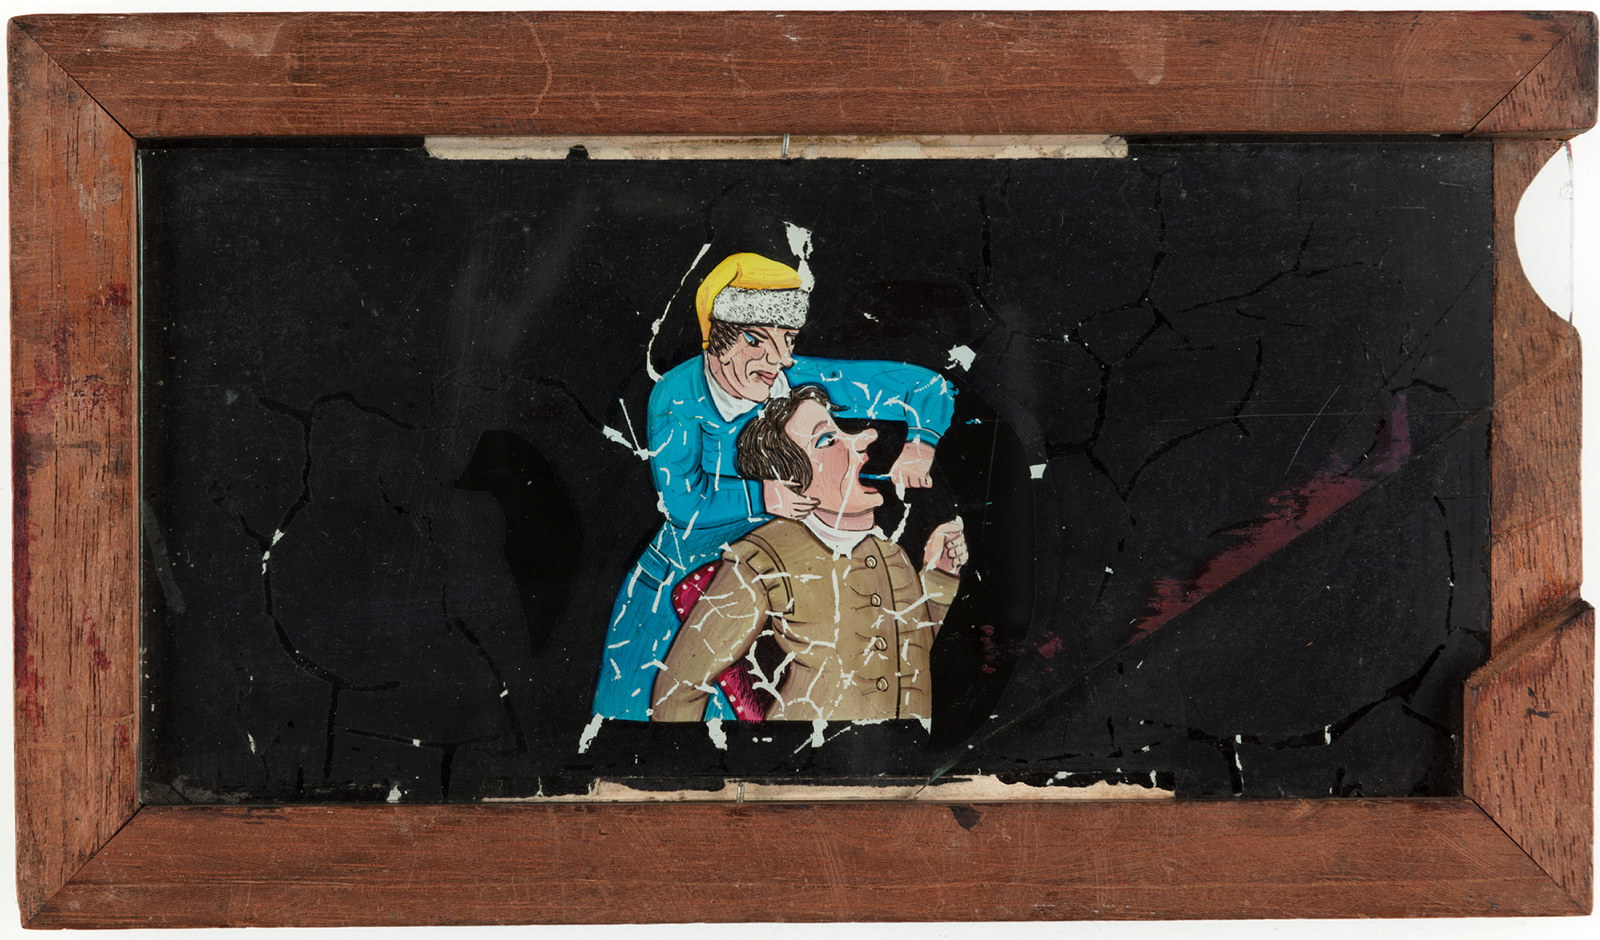 A timber framed glass magic lantern slide featuring a hand-drawn and coloured image of a dentist pulling a tooth. A secondary sliding glass plate provides before and after images of the extraction.